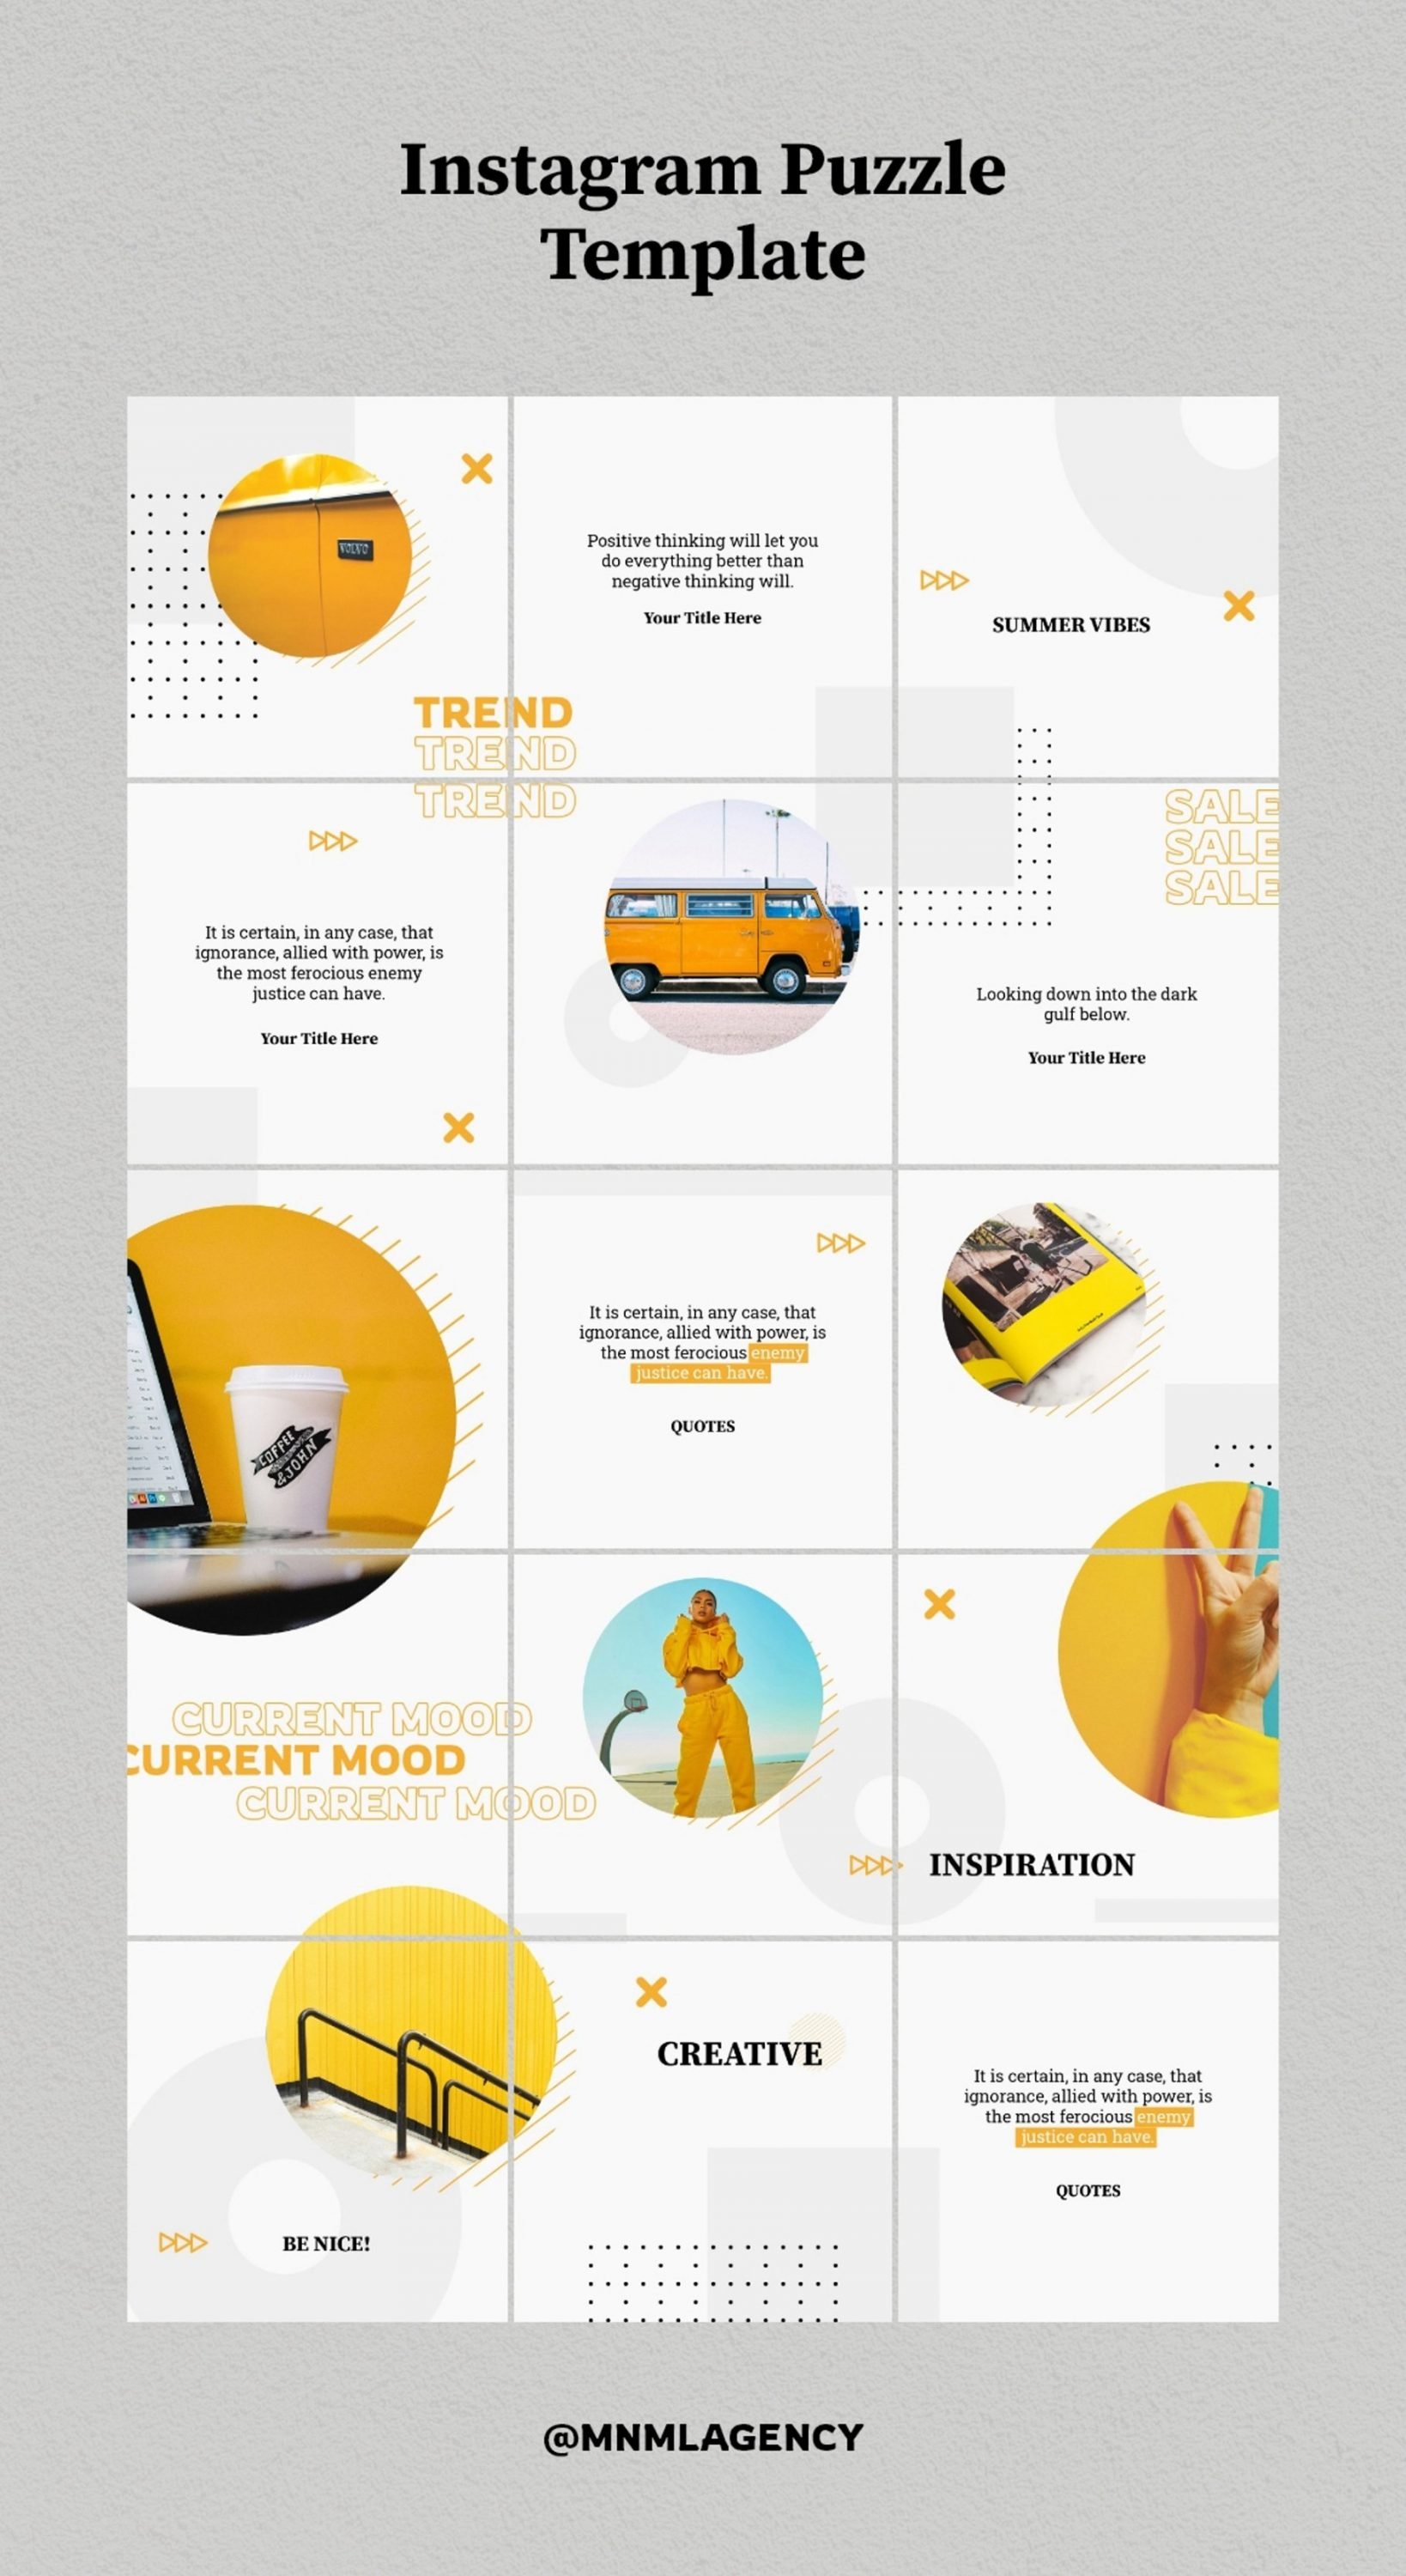 A very stylish template in a minimalist style with yellow accents.